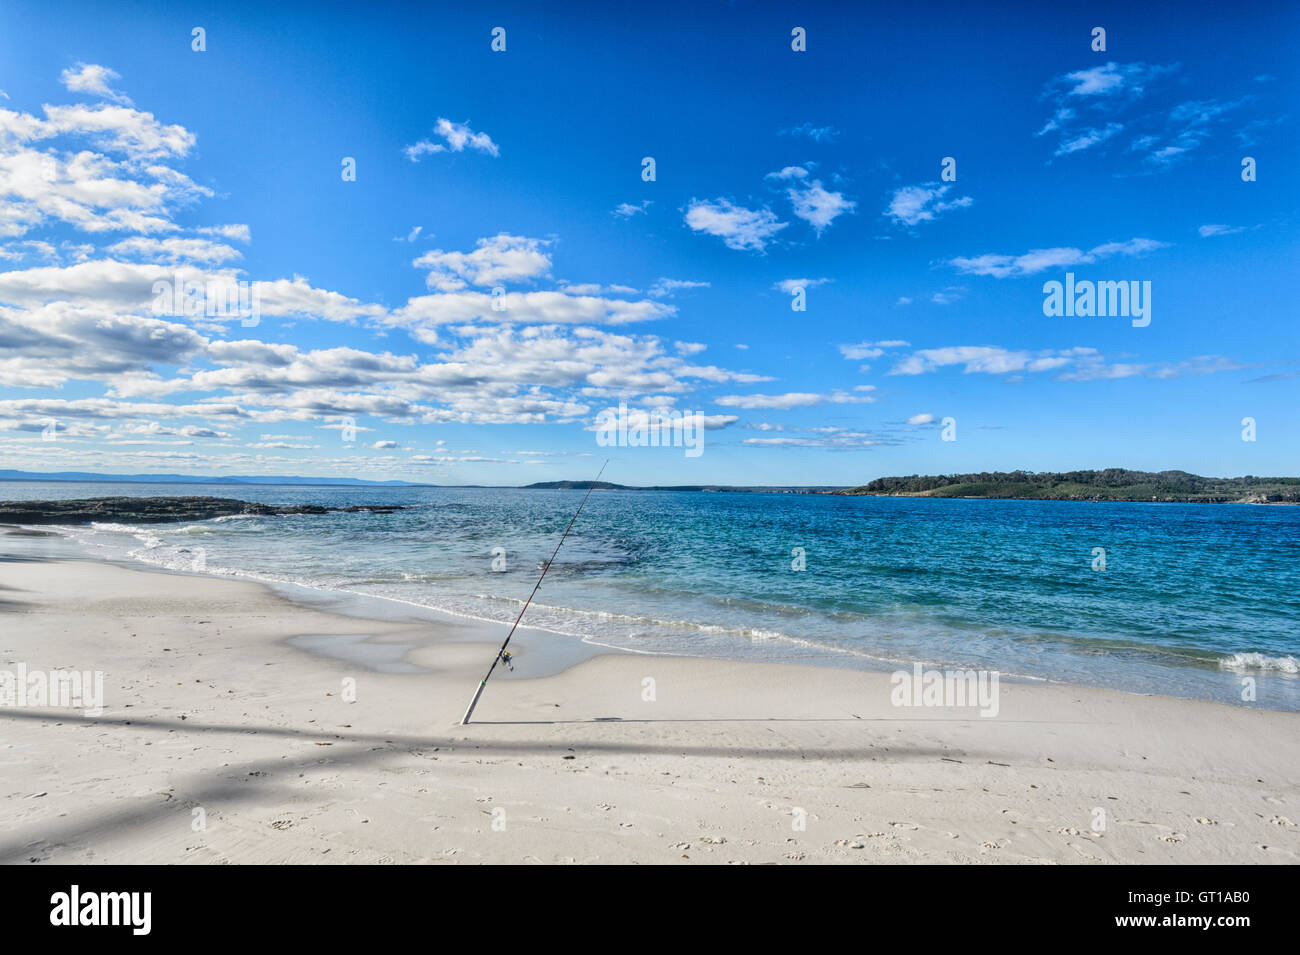 View of Murrays Beach in picturesque Jervis Bay, Booderee National Park, New South Wales, NSW, Australia Stock Photo